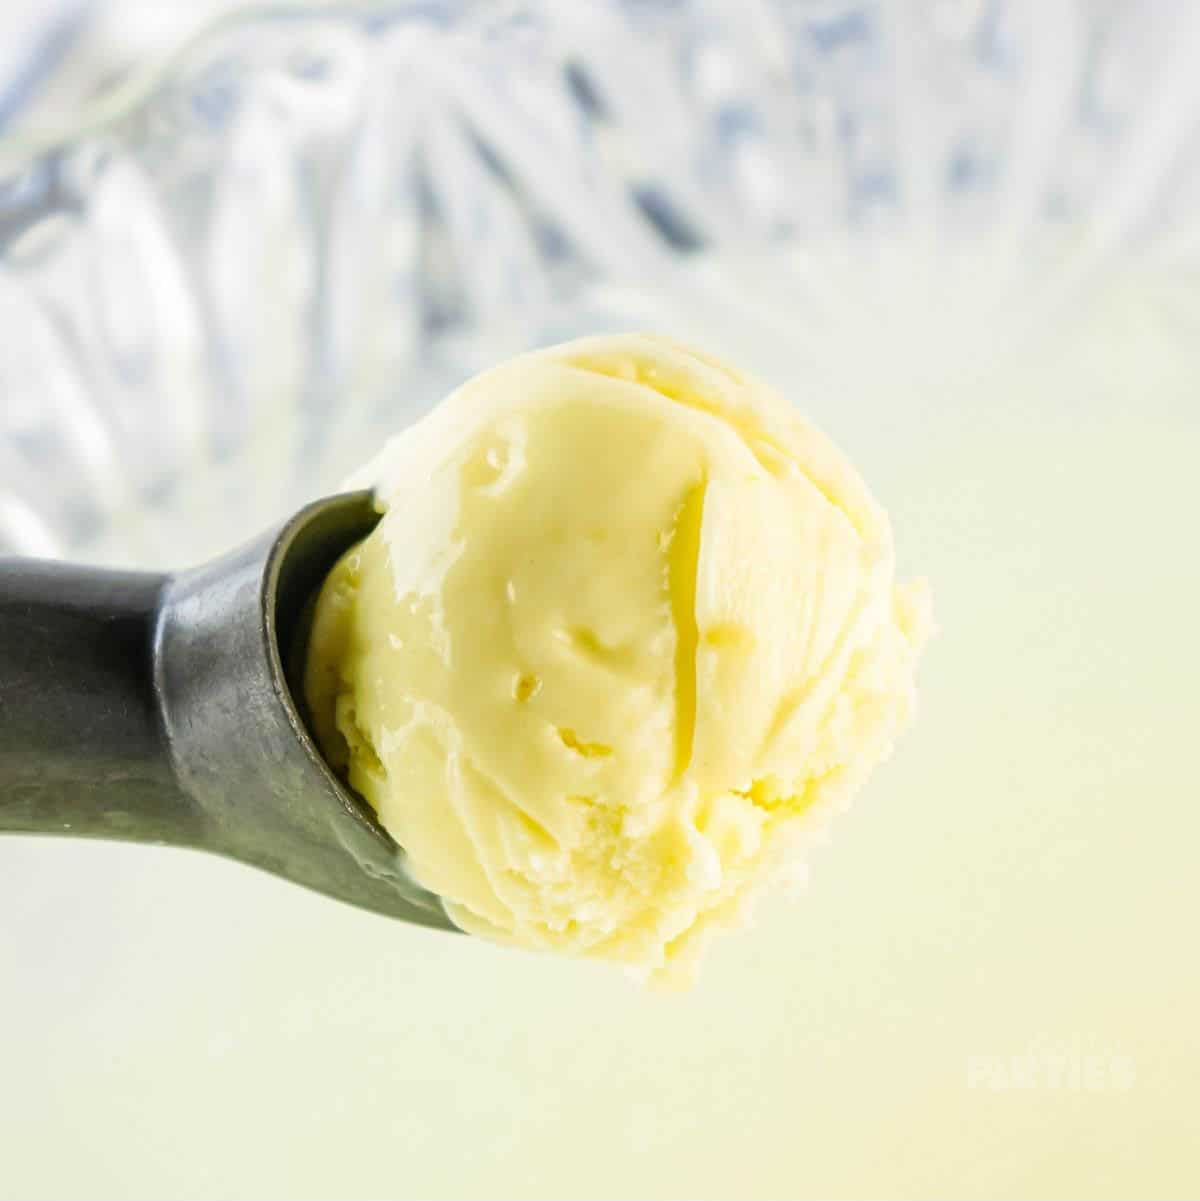 A scoop of yellow sherbet.